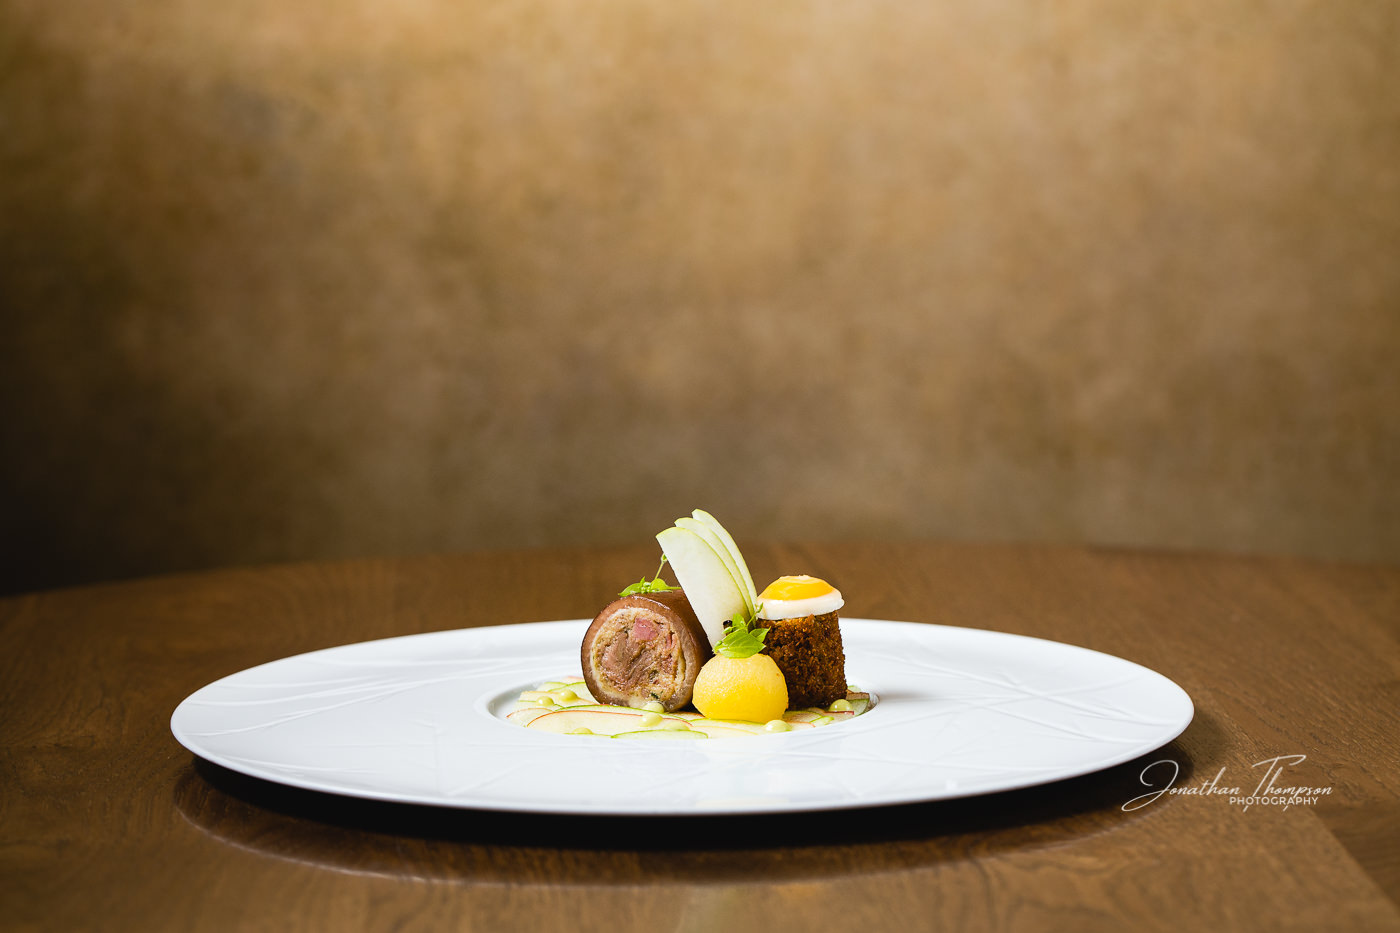 Promotional image with a fine dining pigs trotter dish showing The New Vintage Popup Background from Lastolite